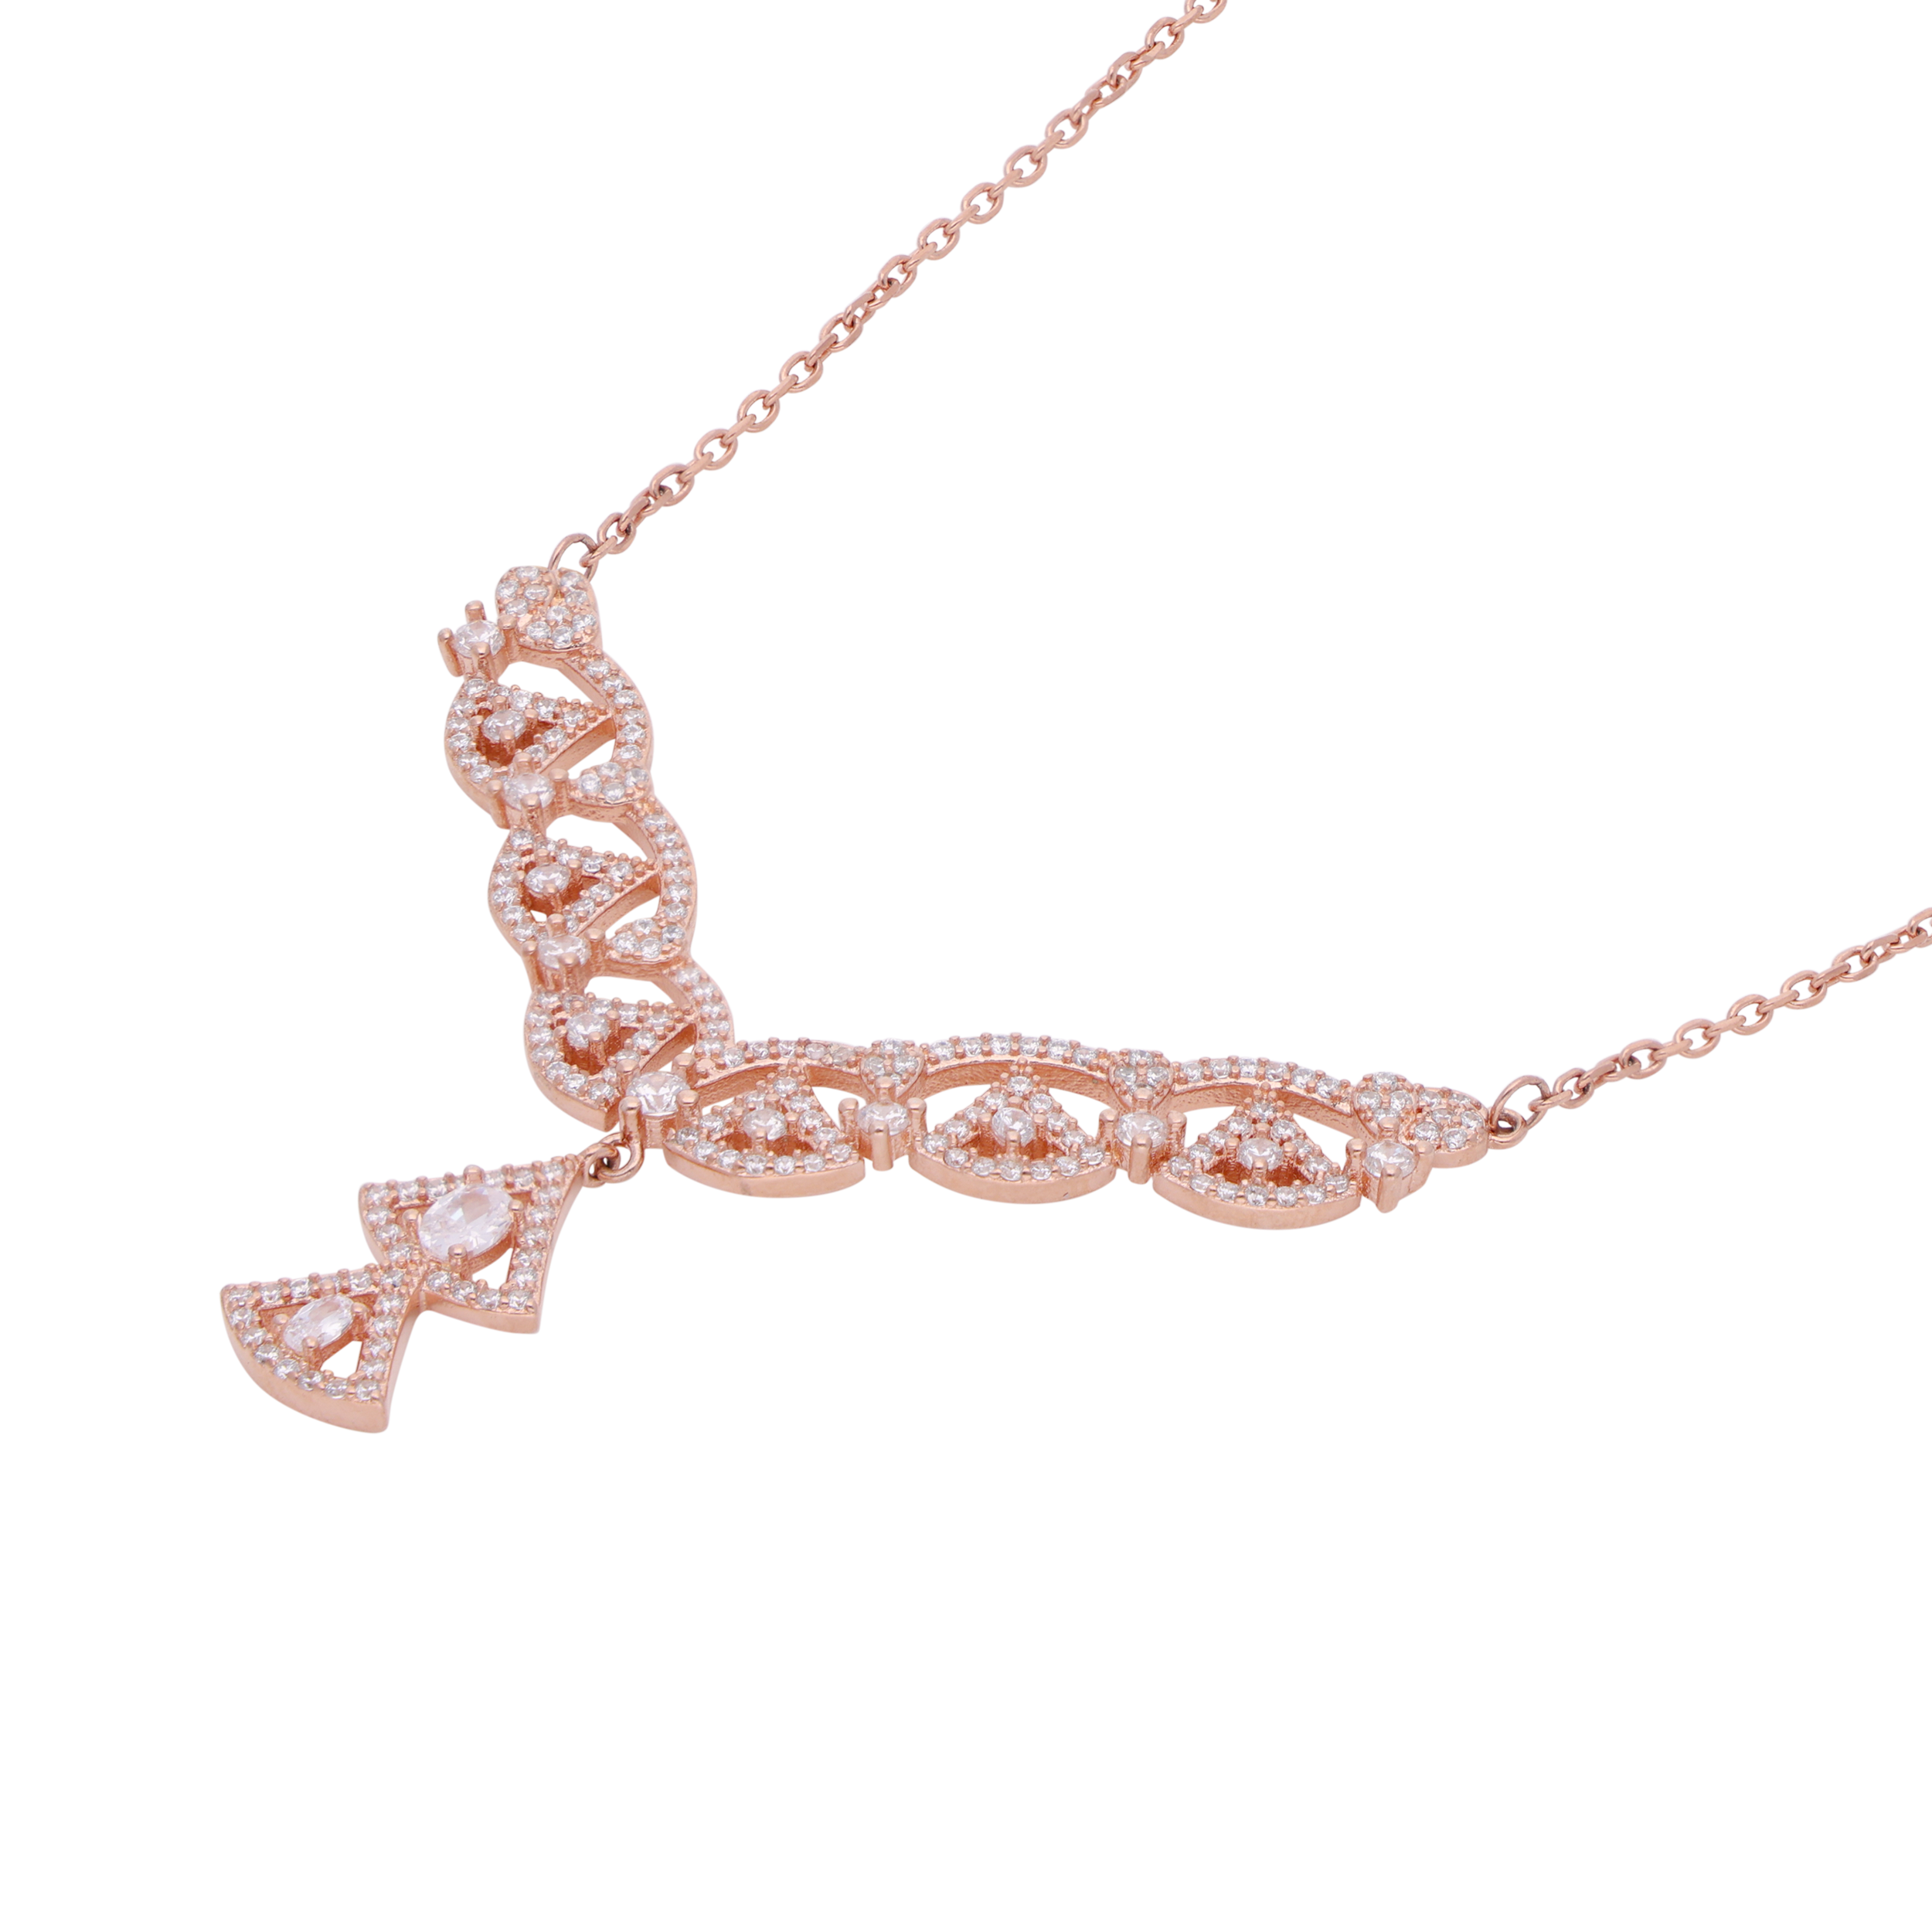 Radiant Rose: Sterling Silver Double Hood Chain Pendant | SKU : 0003113981